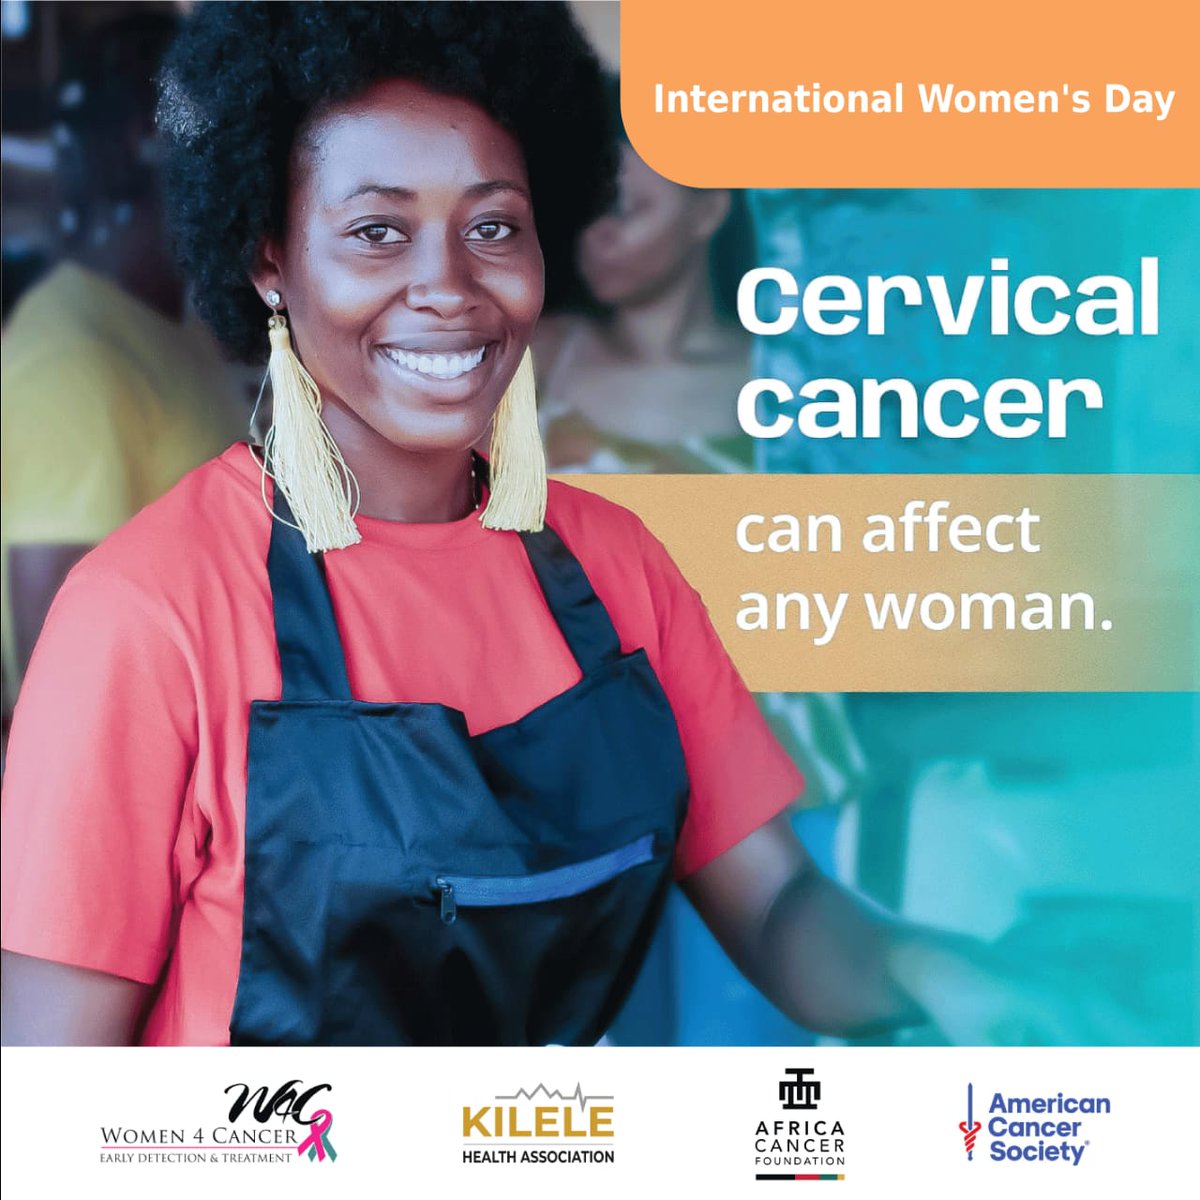 Cervical cancer can affect any woman – but you can stop it with regular cervical screening tests. Visit a health facility to get your cervical cancer screening. #PreventGlobalHPVCancers #ACancerFreeAfrica #InternationalWomensDay